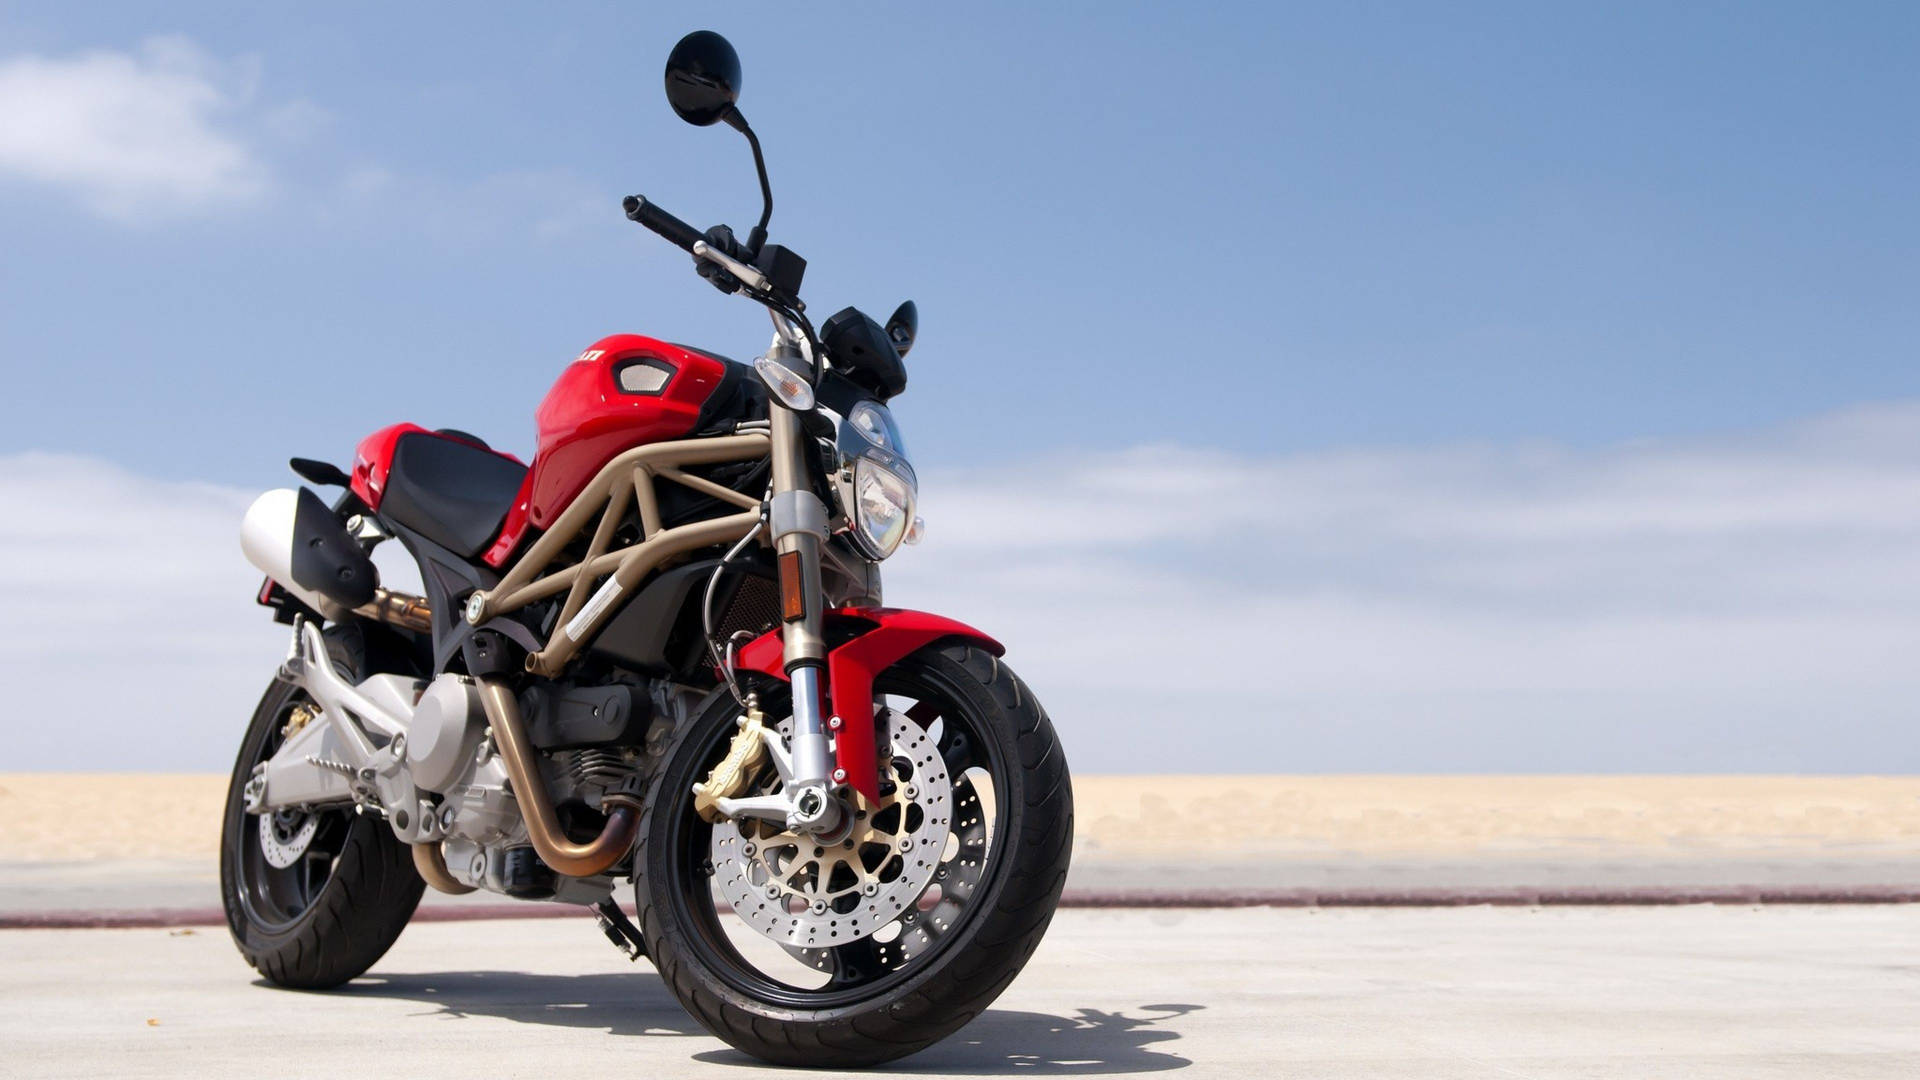 Speed Meets Style On The Red Ducati Diavel Motorbike Background